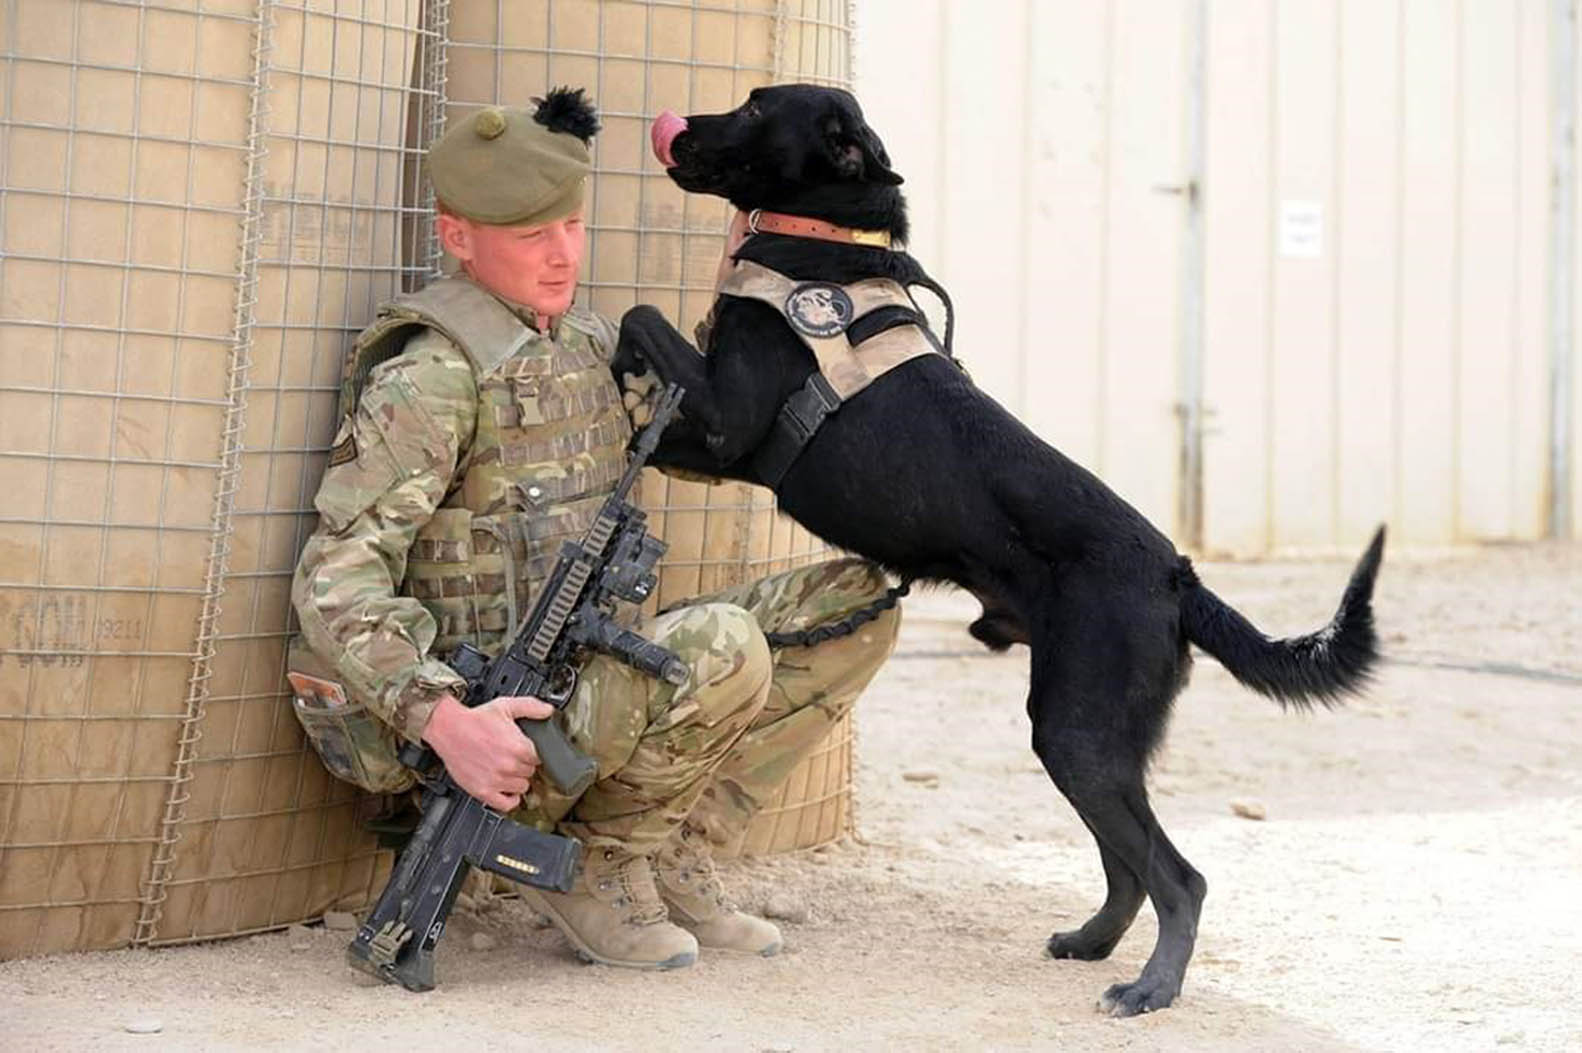 Glasgow Humane Society rescuer William Graham with bomb-sniffing dog Lede in Afghanistan Picture: Glasgow Humane Society